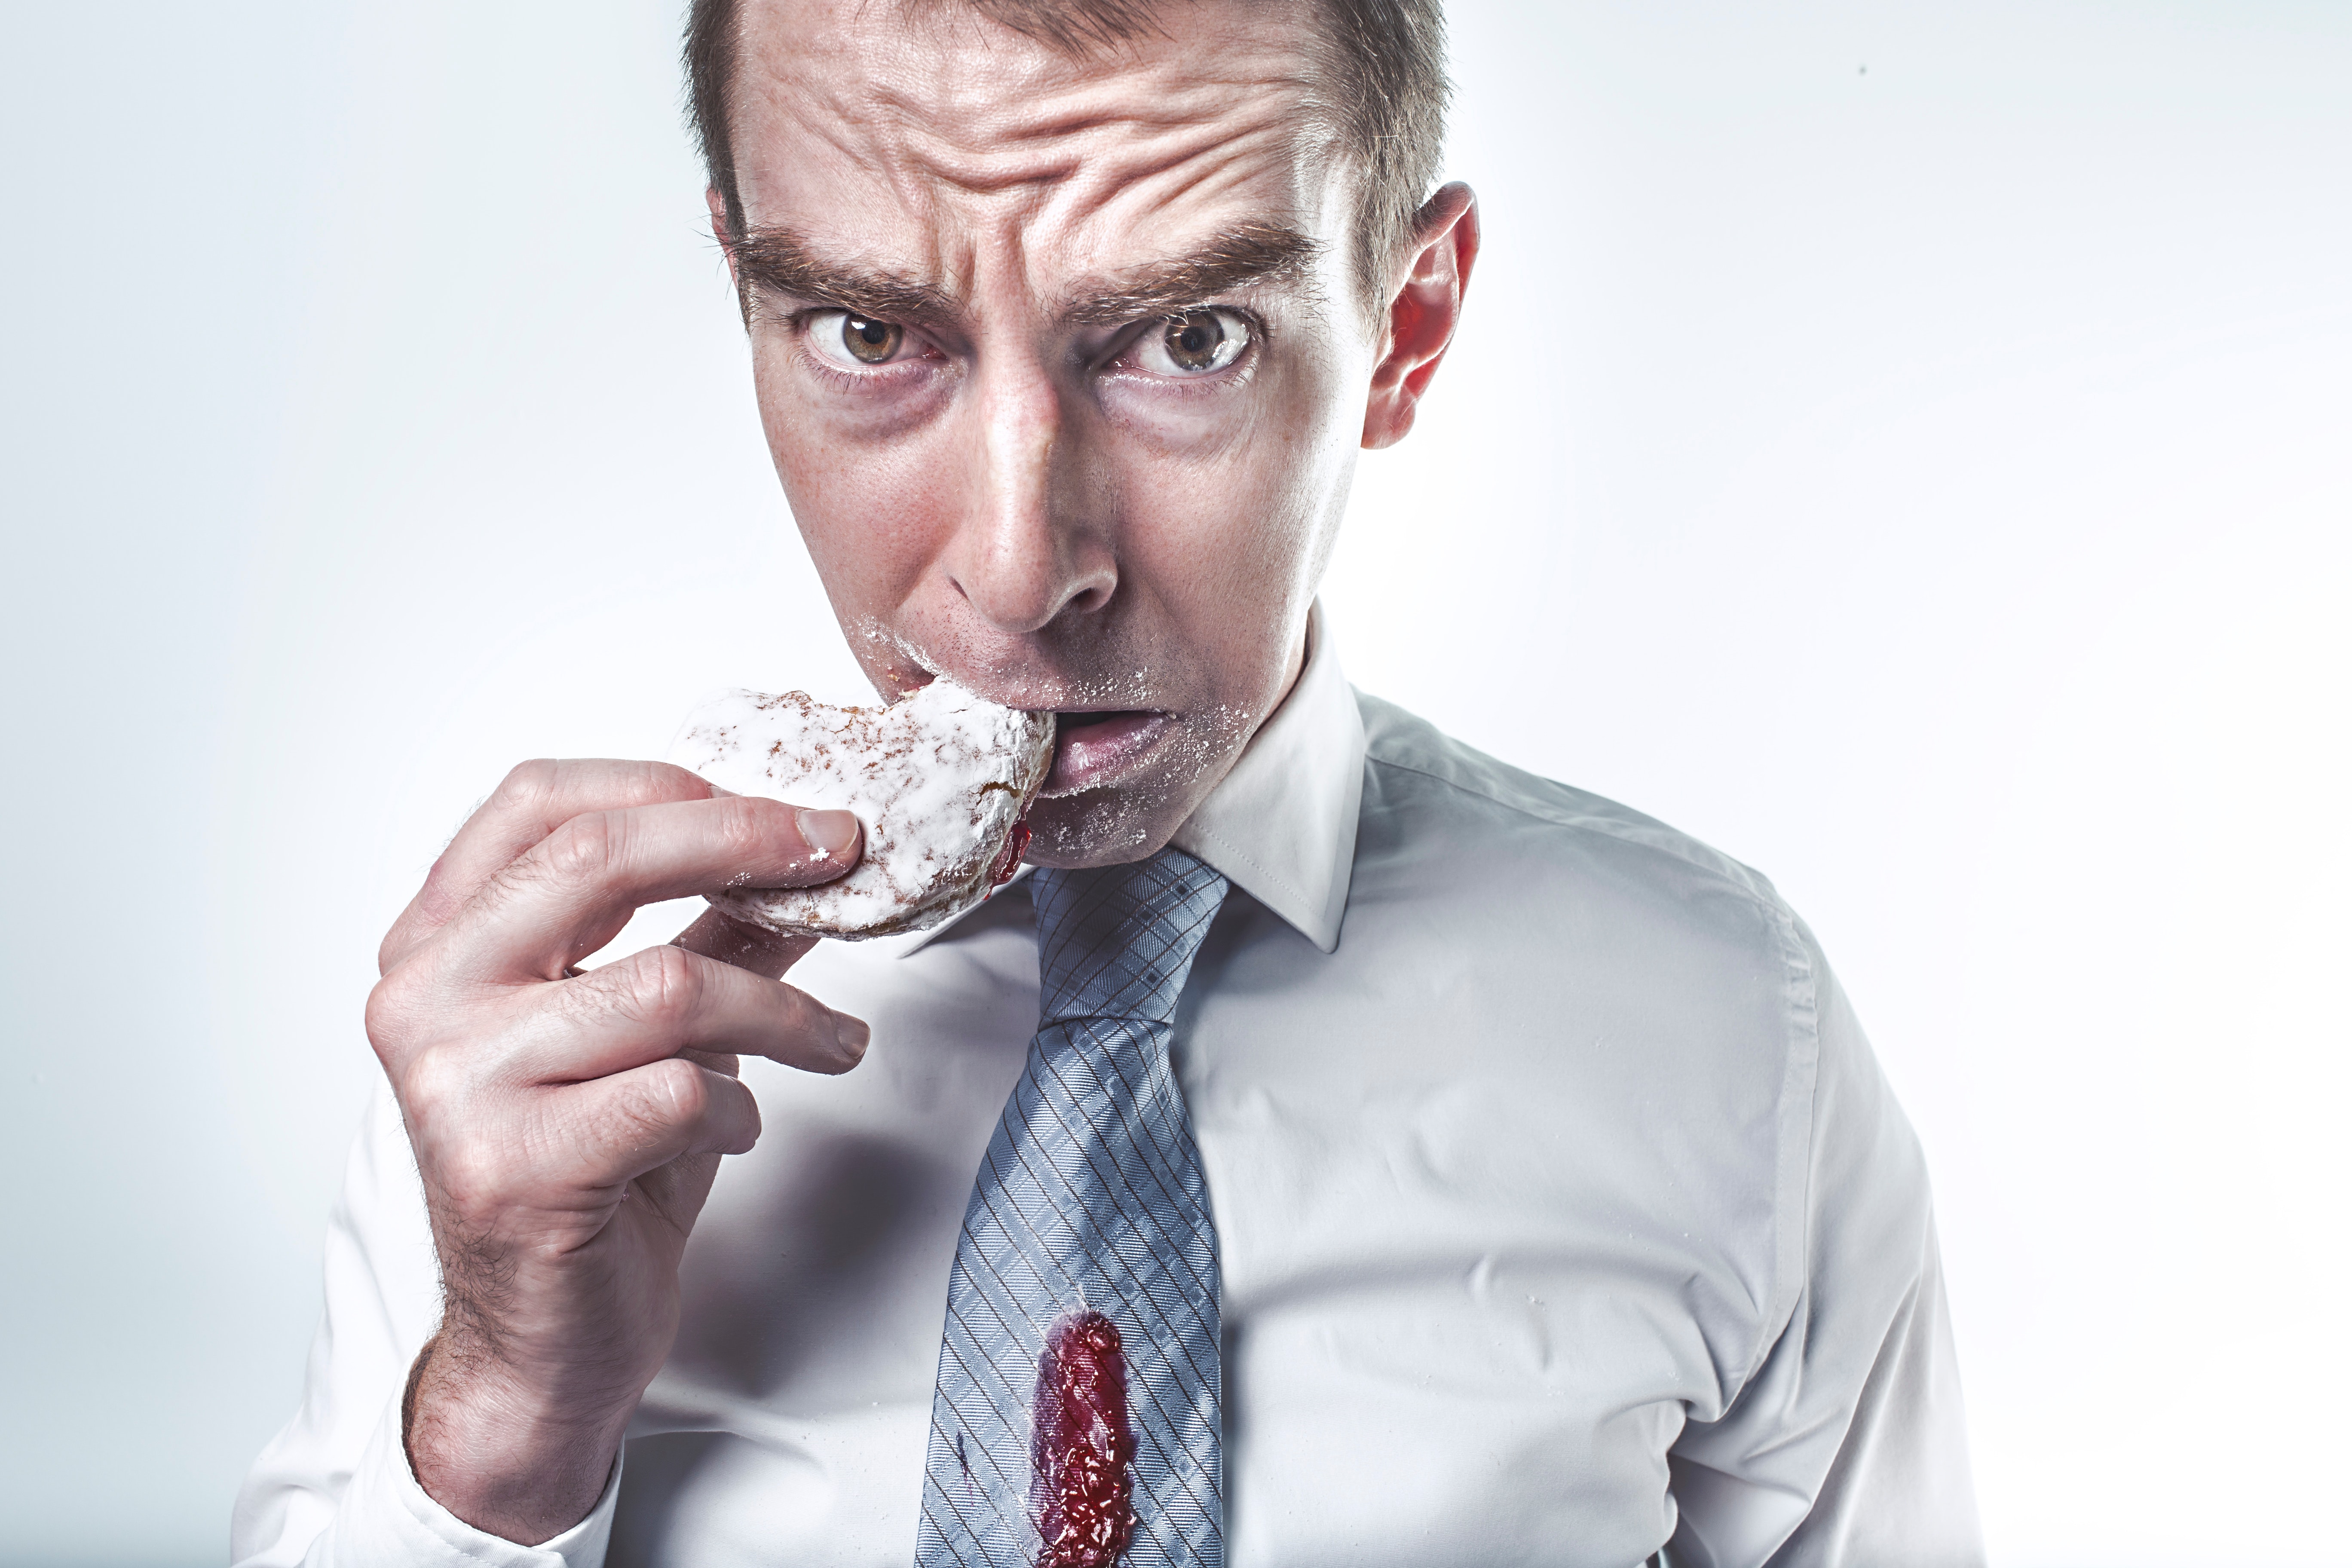 Picture shows a hungry/angry white man wearing a shirt and tie and eating a powdered donut.